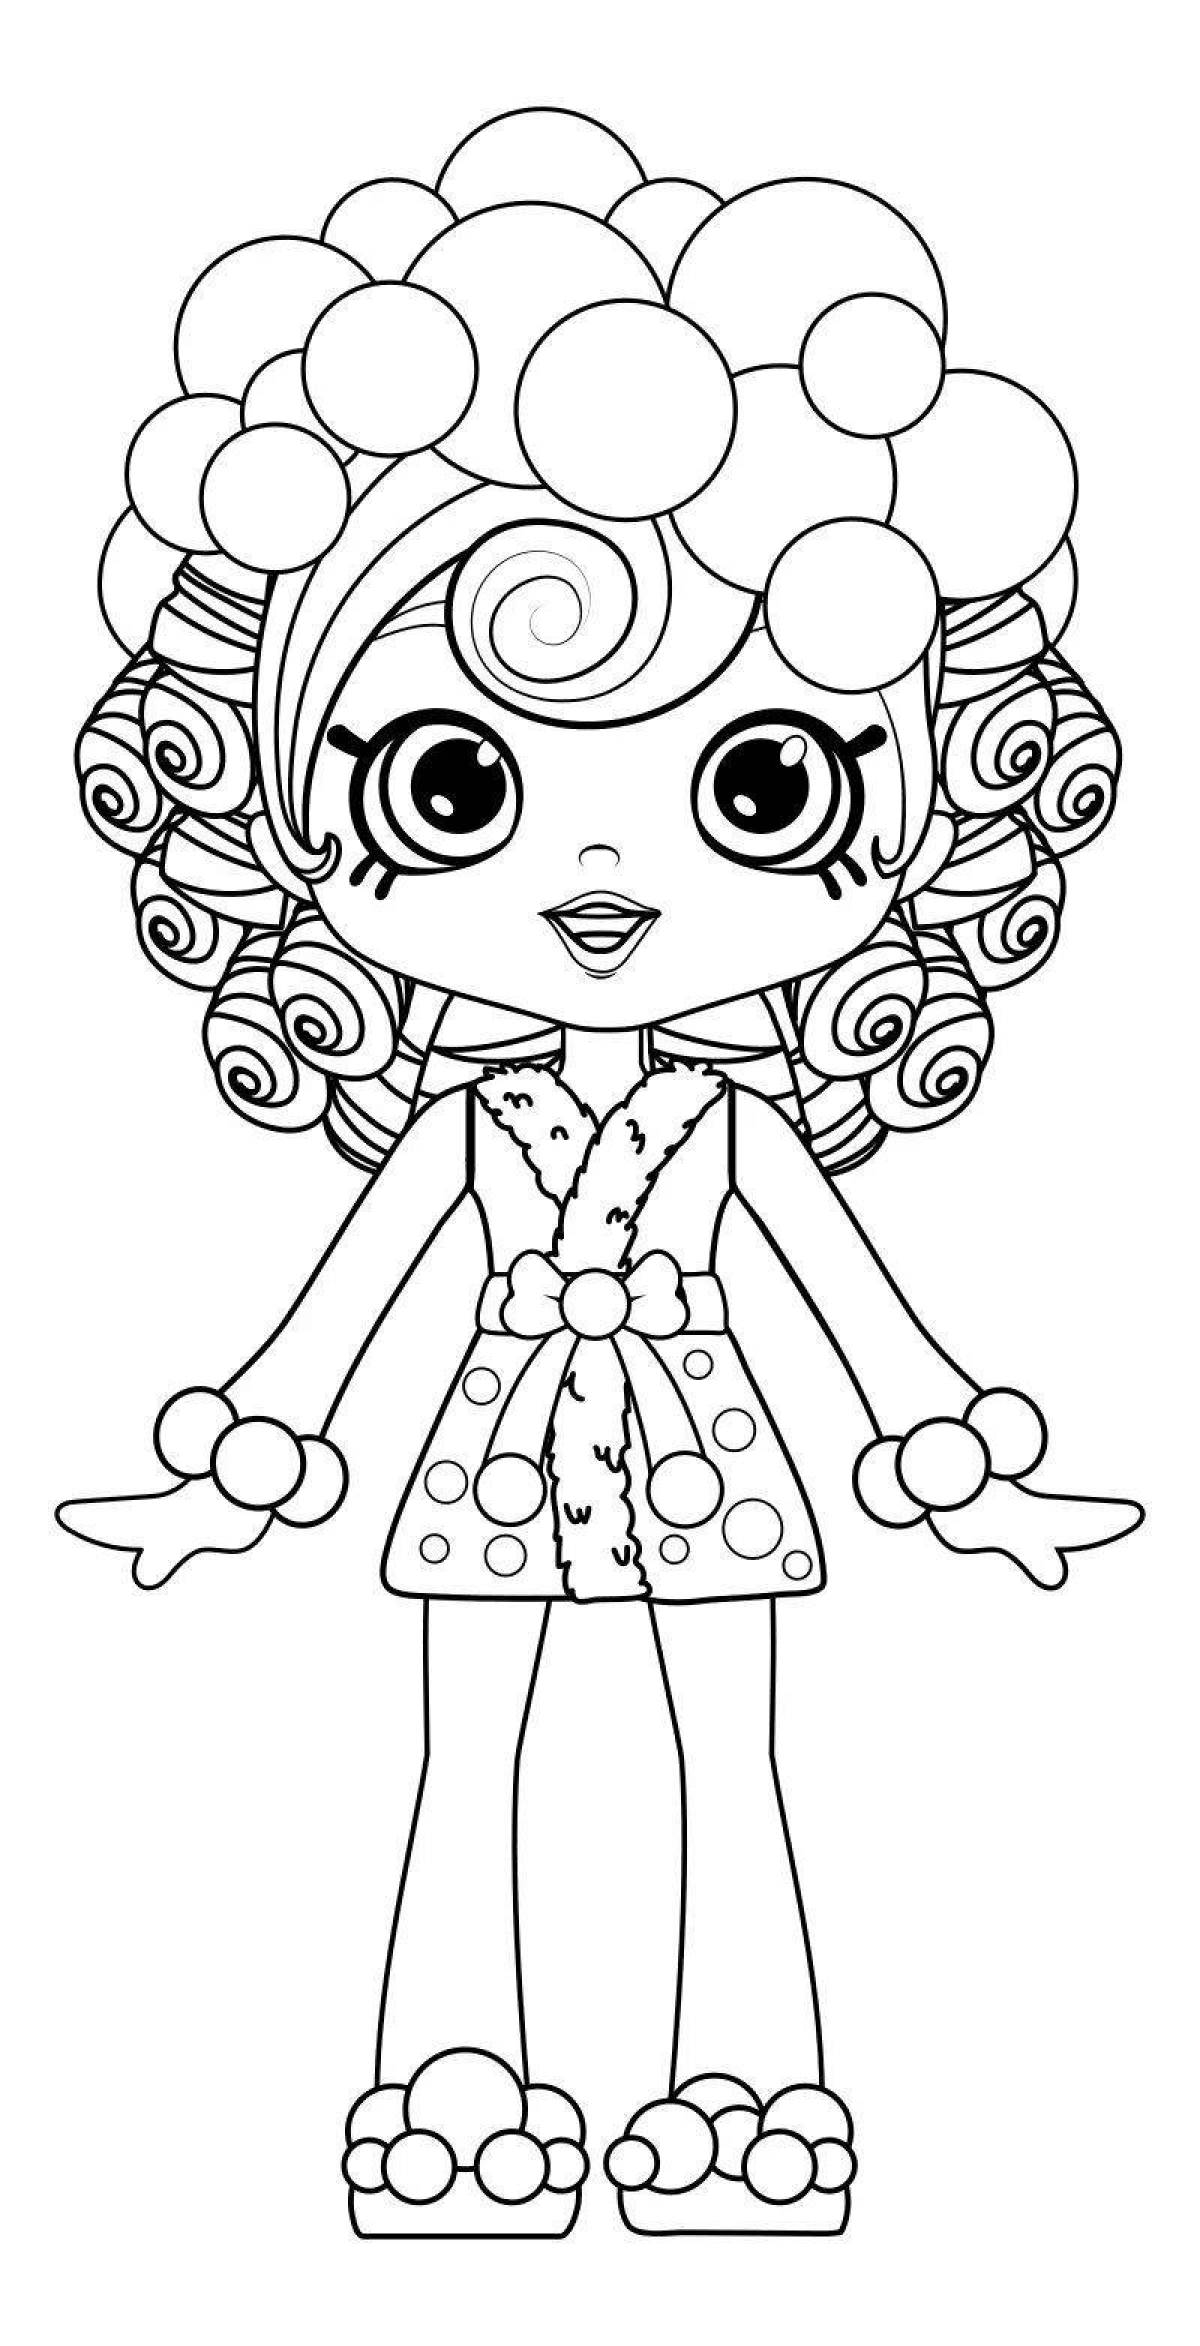 Awesome chachimol coloring pages